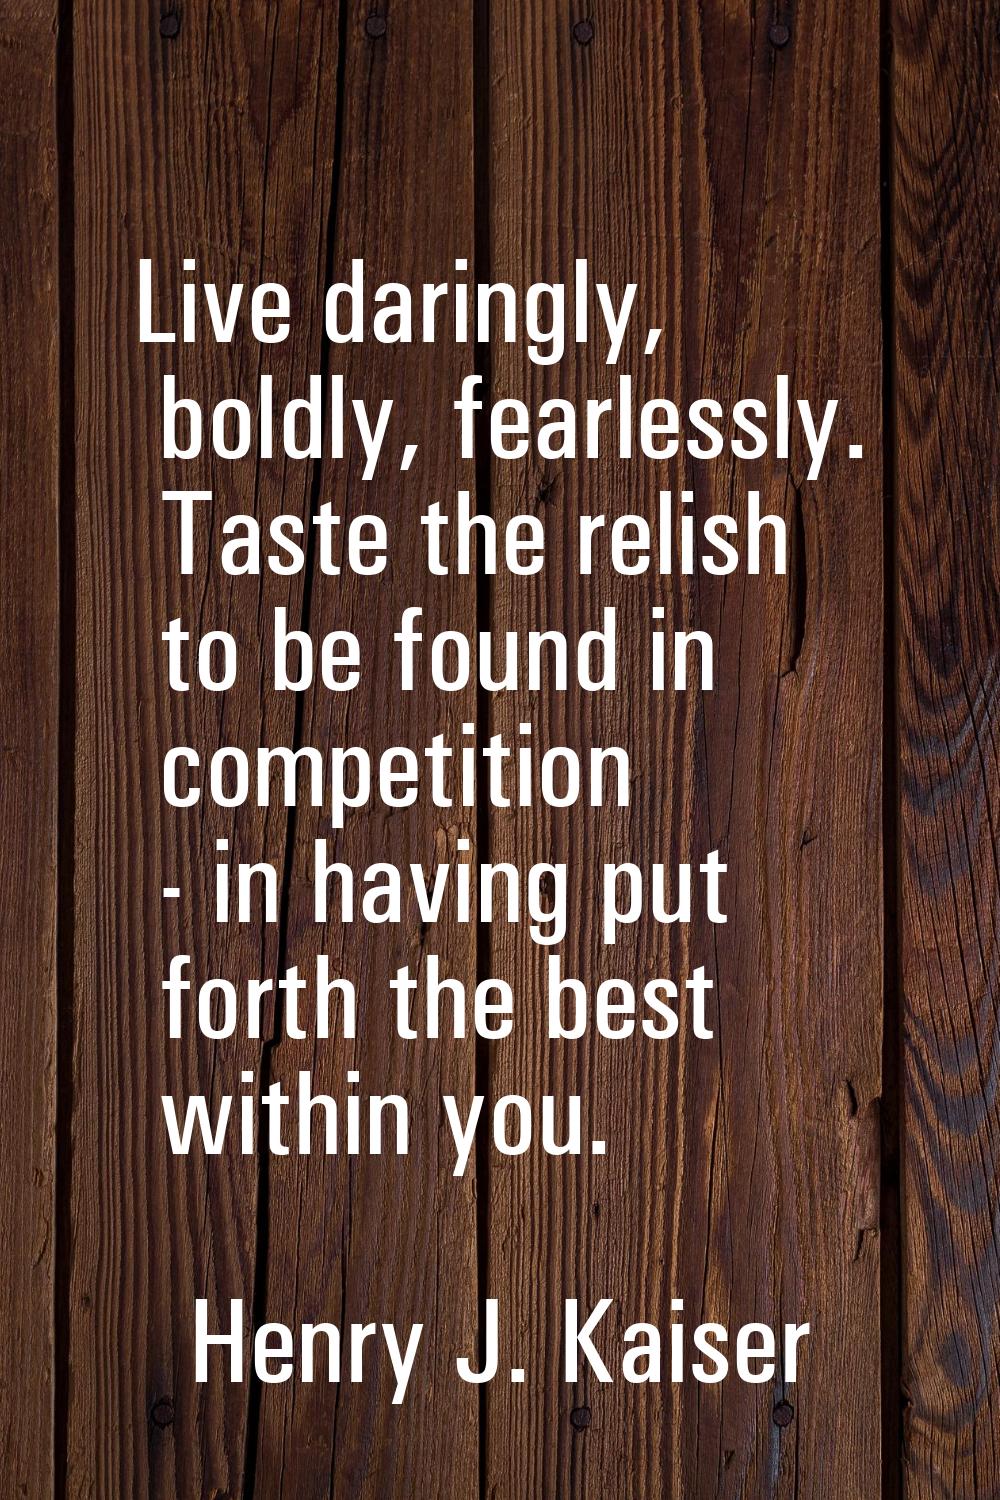 Live daringly, boldly, fearlessly. Taste the relish to be found in competition - in having put fort